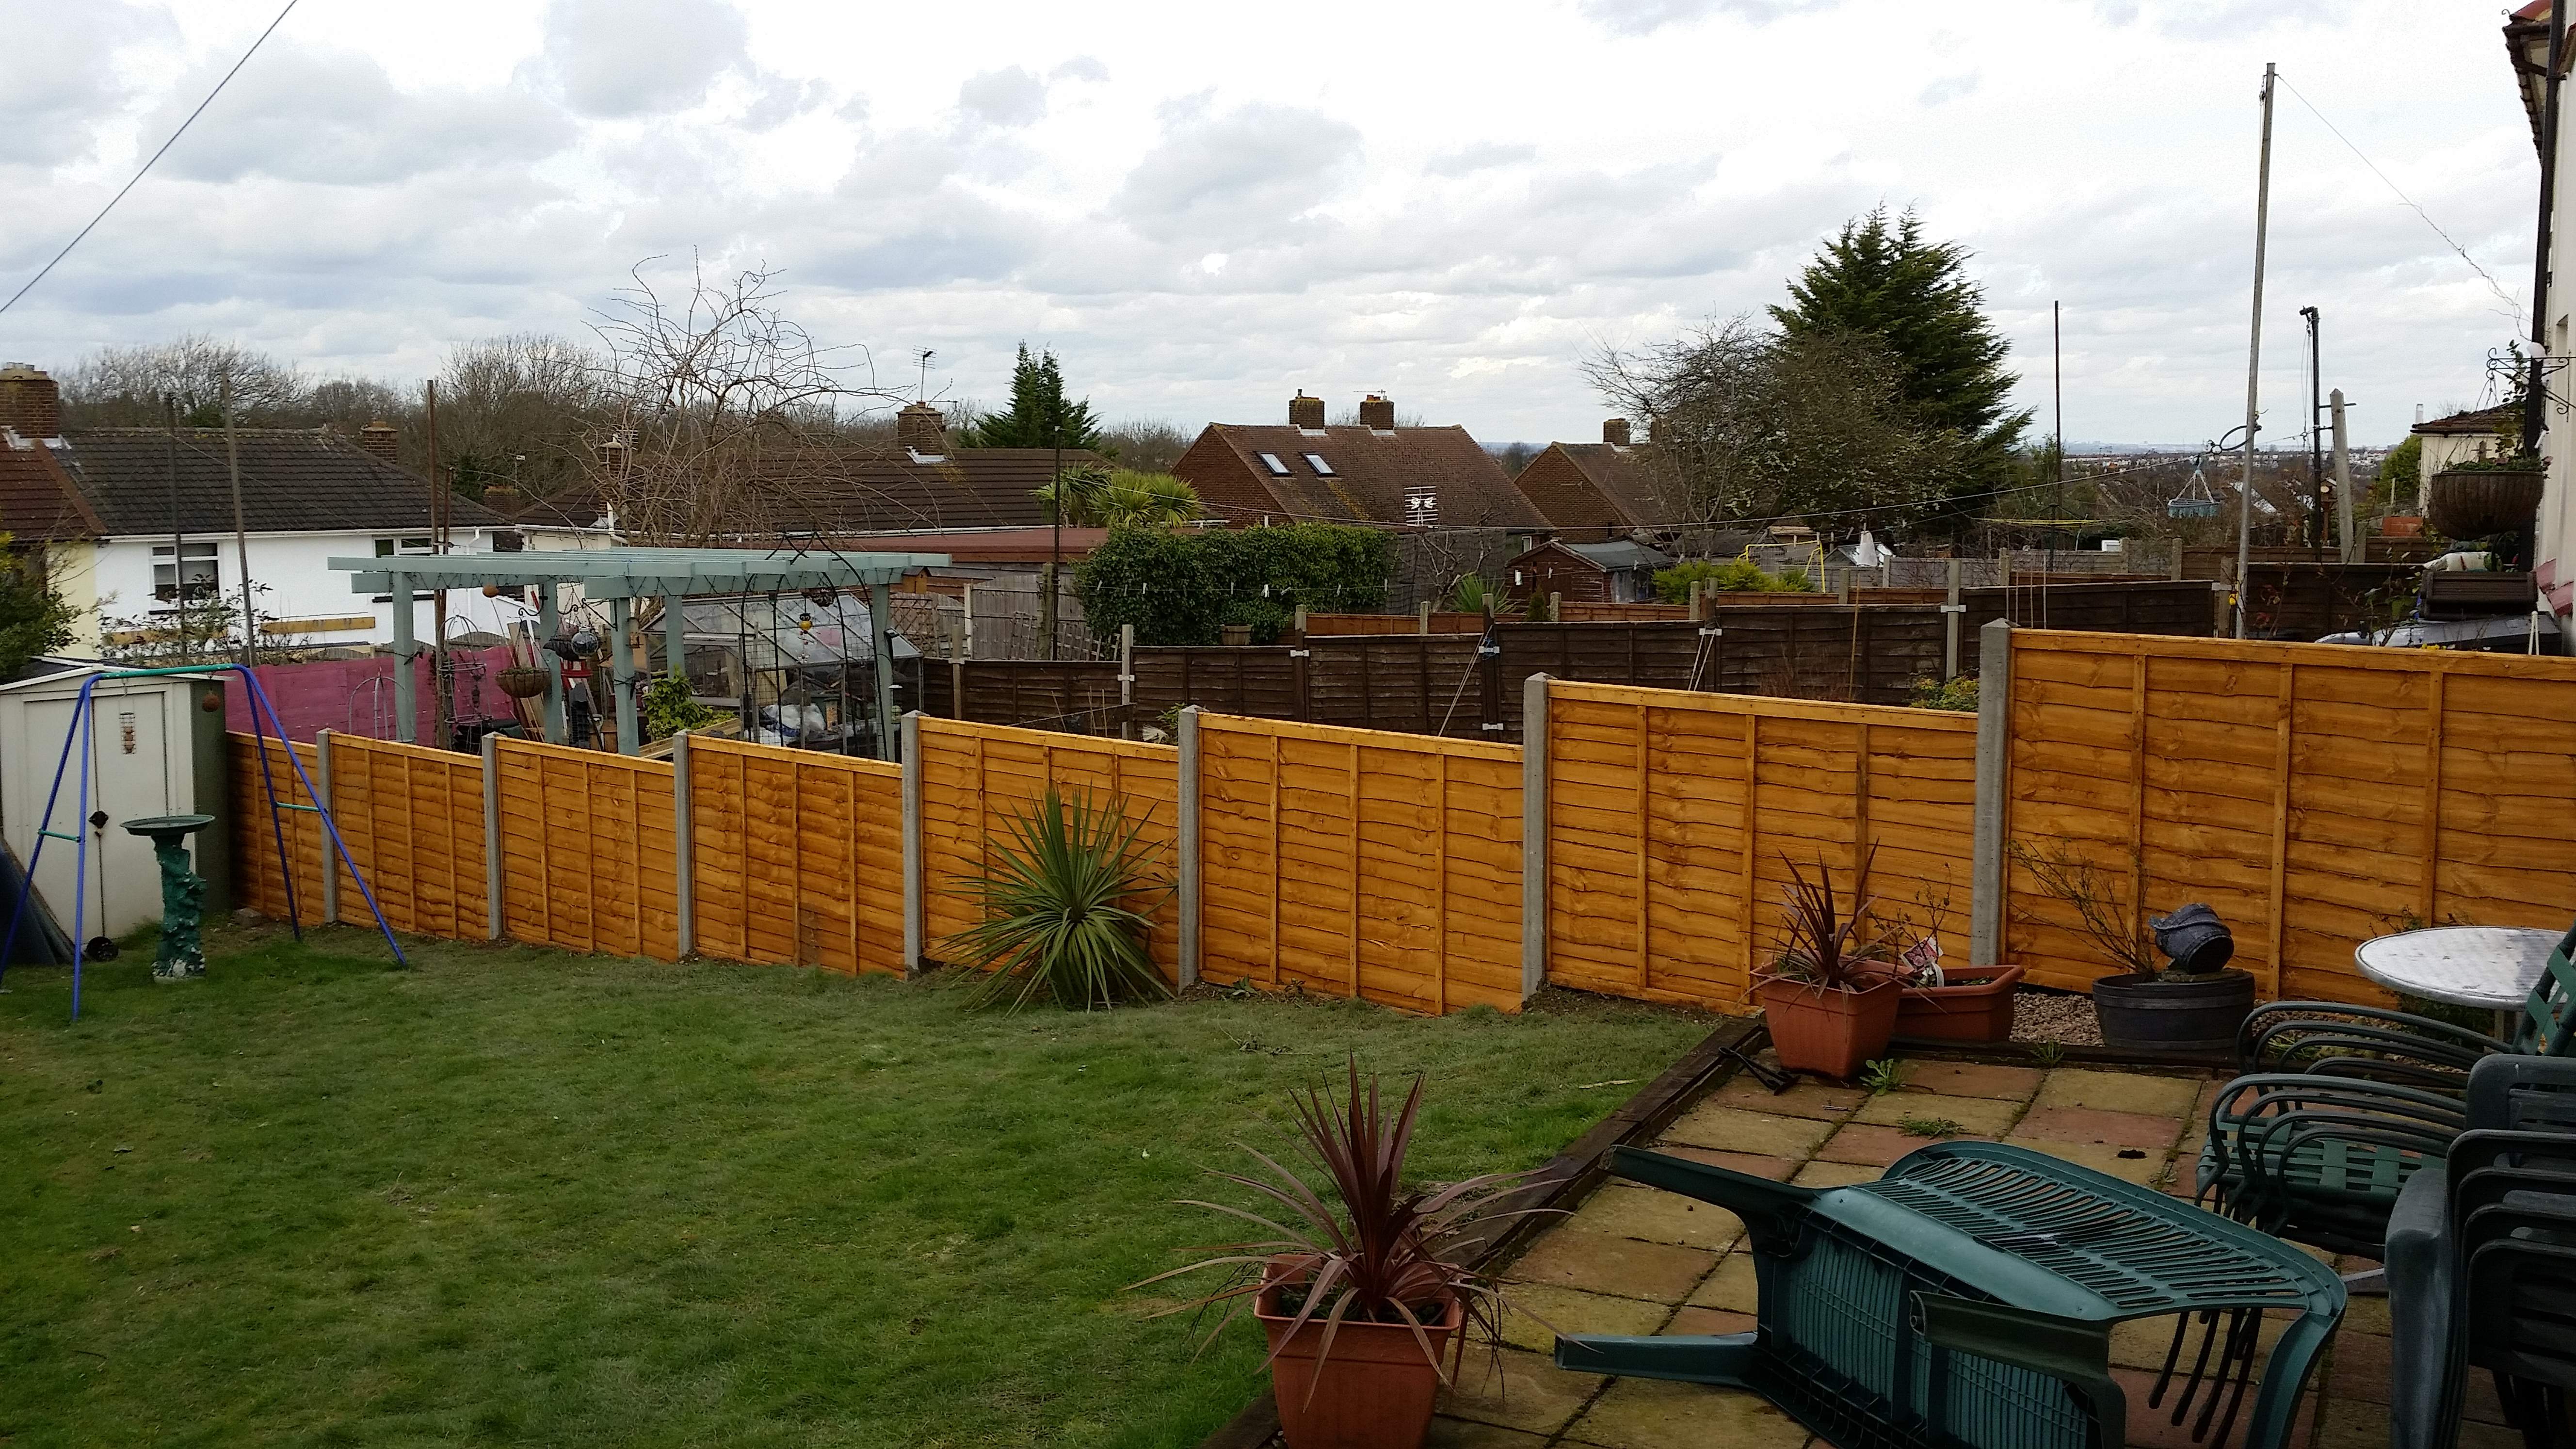 With concrete posts, Fencing installed in Wayfield, Chatham